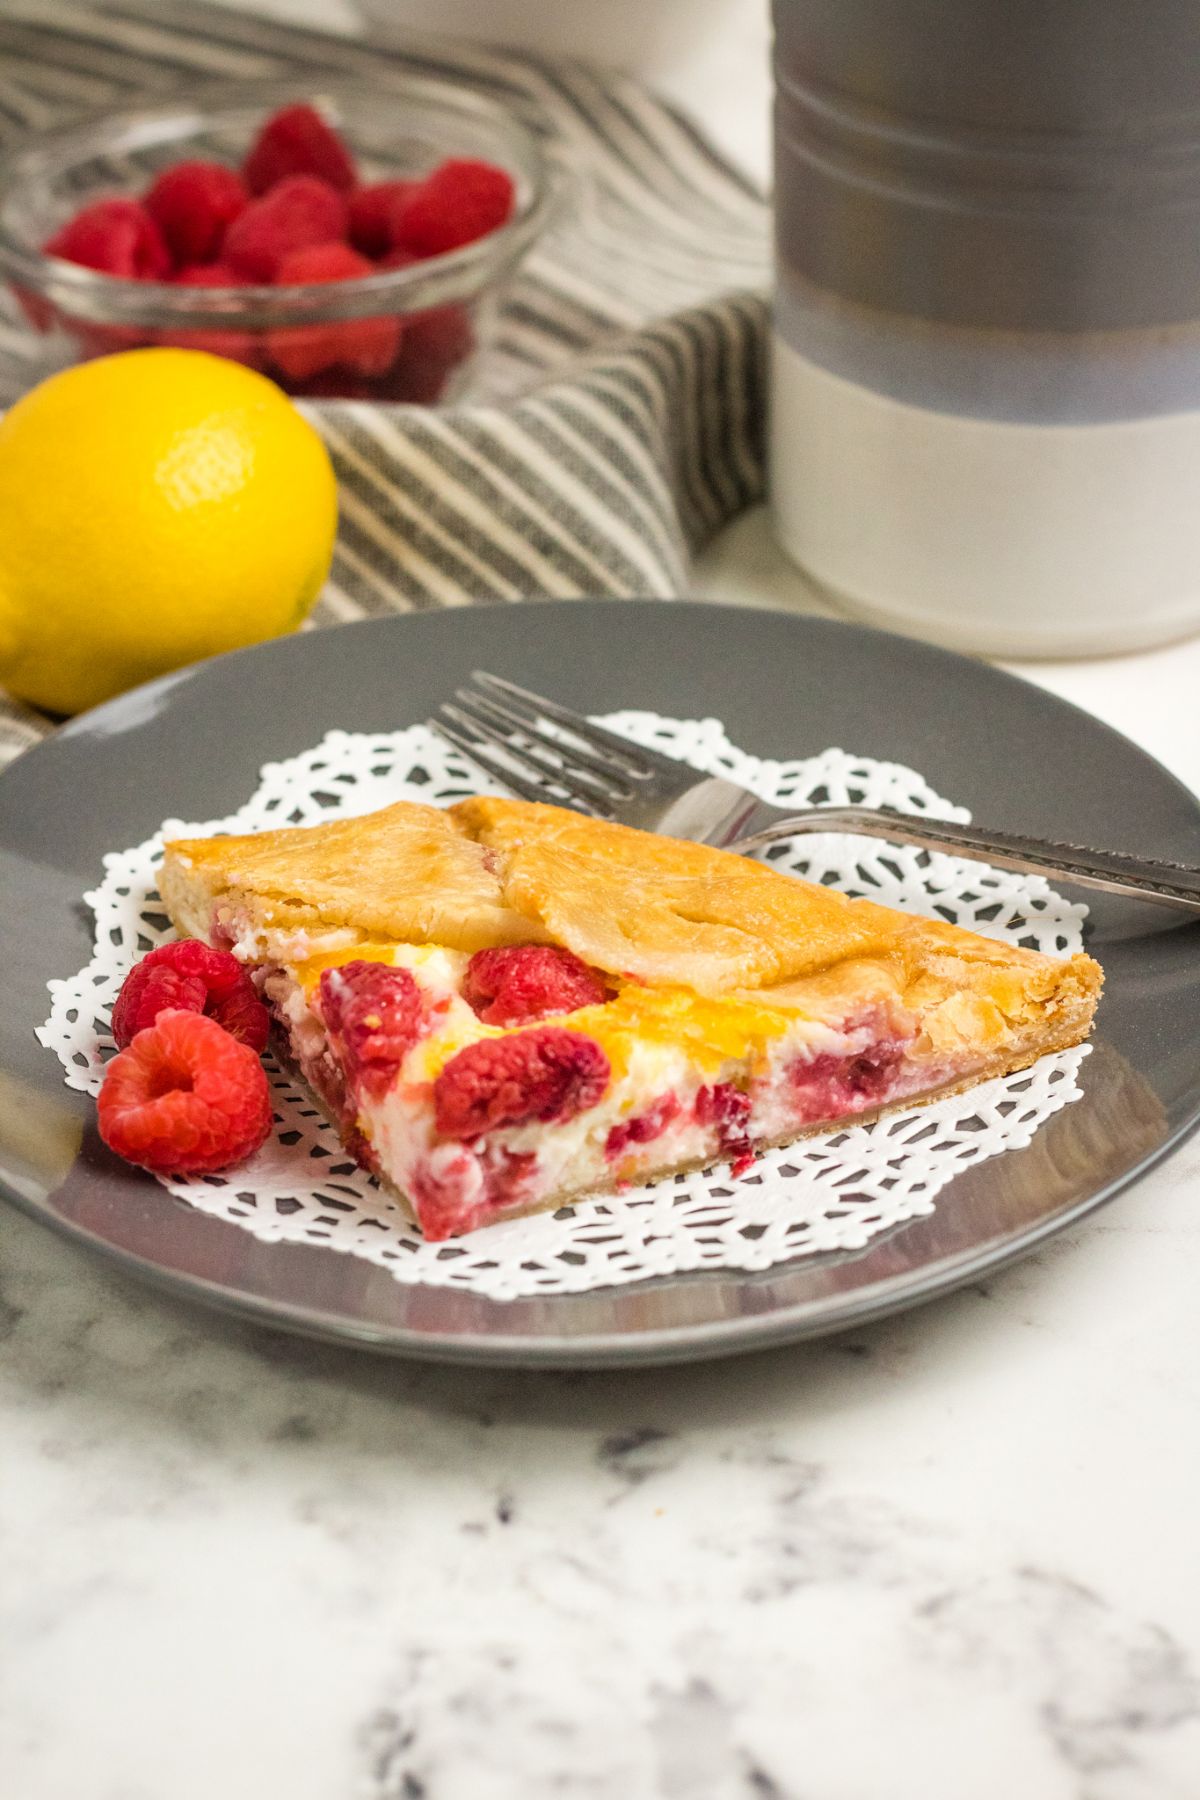 Raspberry Cream Cheese Galette on a gray plate. next to a lemon and a striped cloth